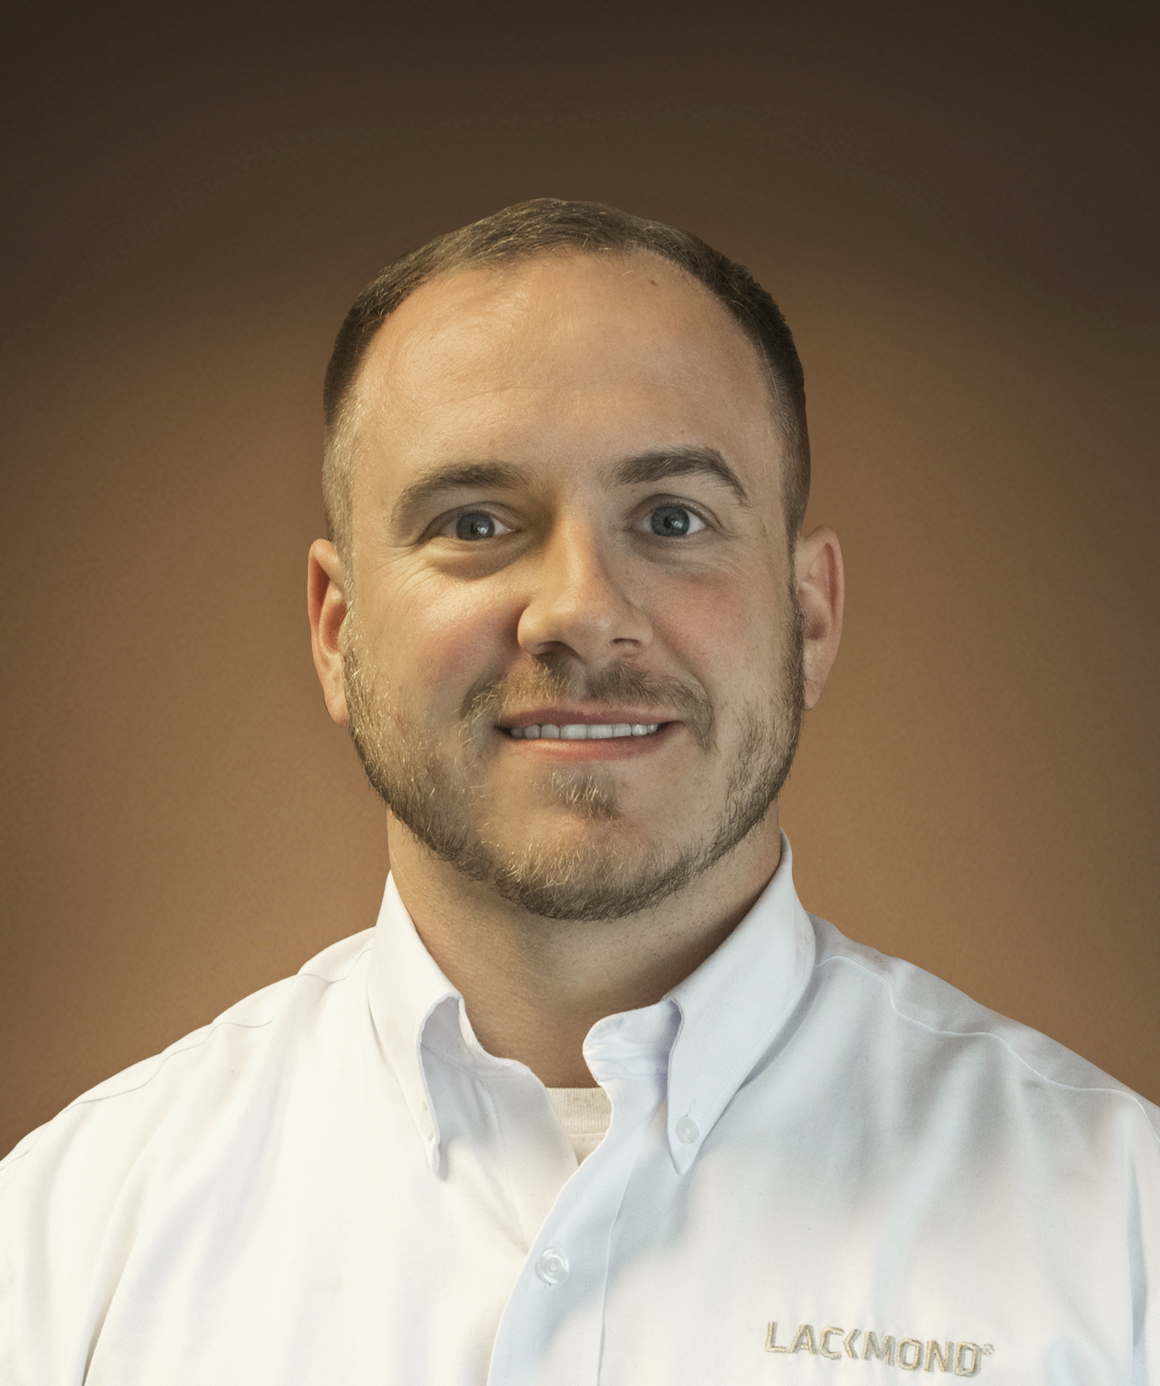 Lackmond Products, Inc., a leading supplier of diamond tools, carbide tools and equipment, has named Jonathan Brock as Southeast Territory Sales Manager, overseeing the company’s sales and business development.